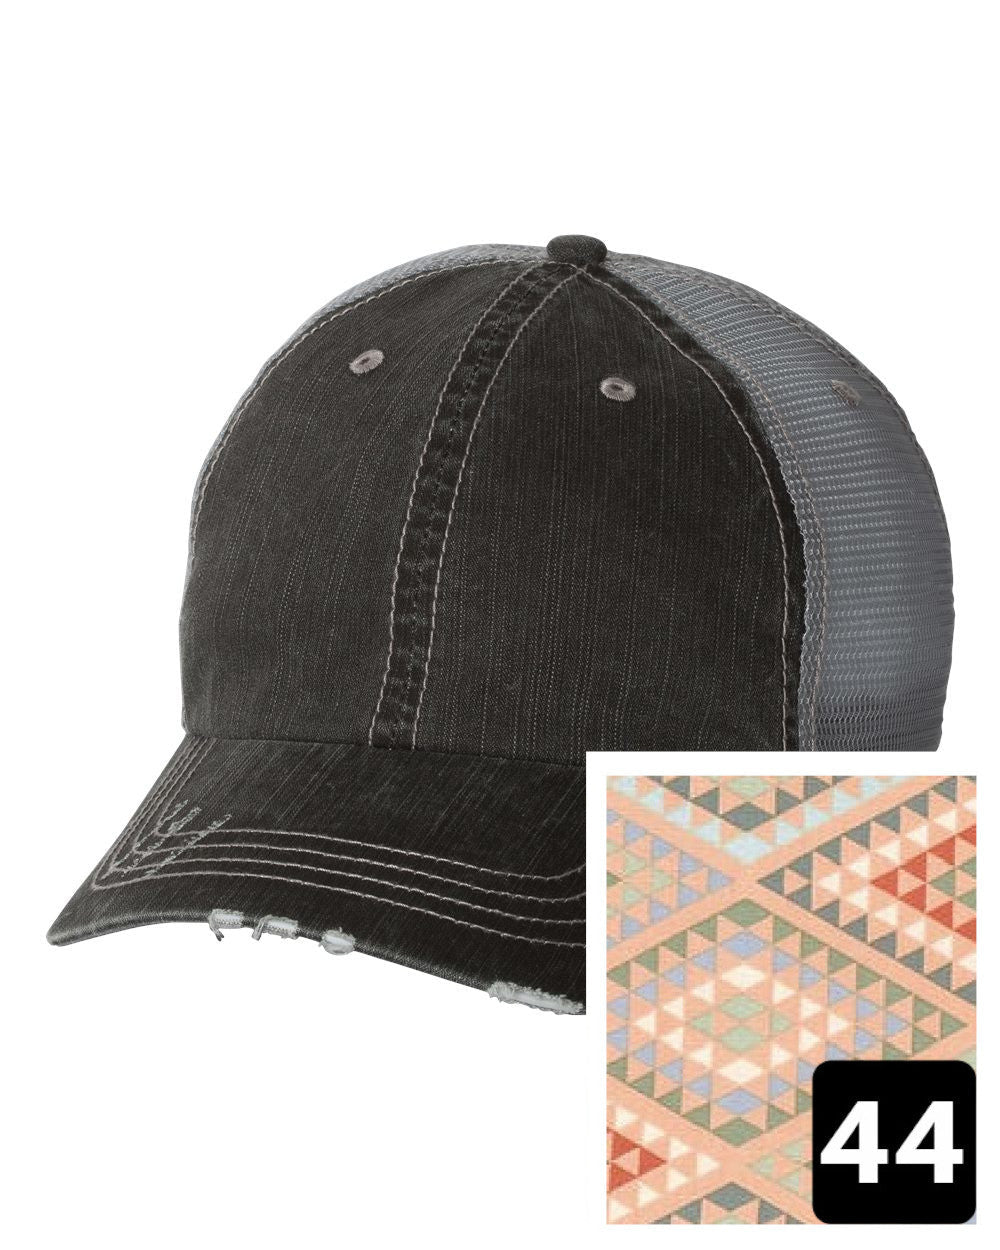 gray distressed trucker hat with navy coral and white chevron fabric state of Utah